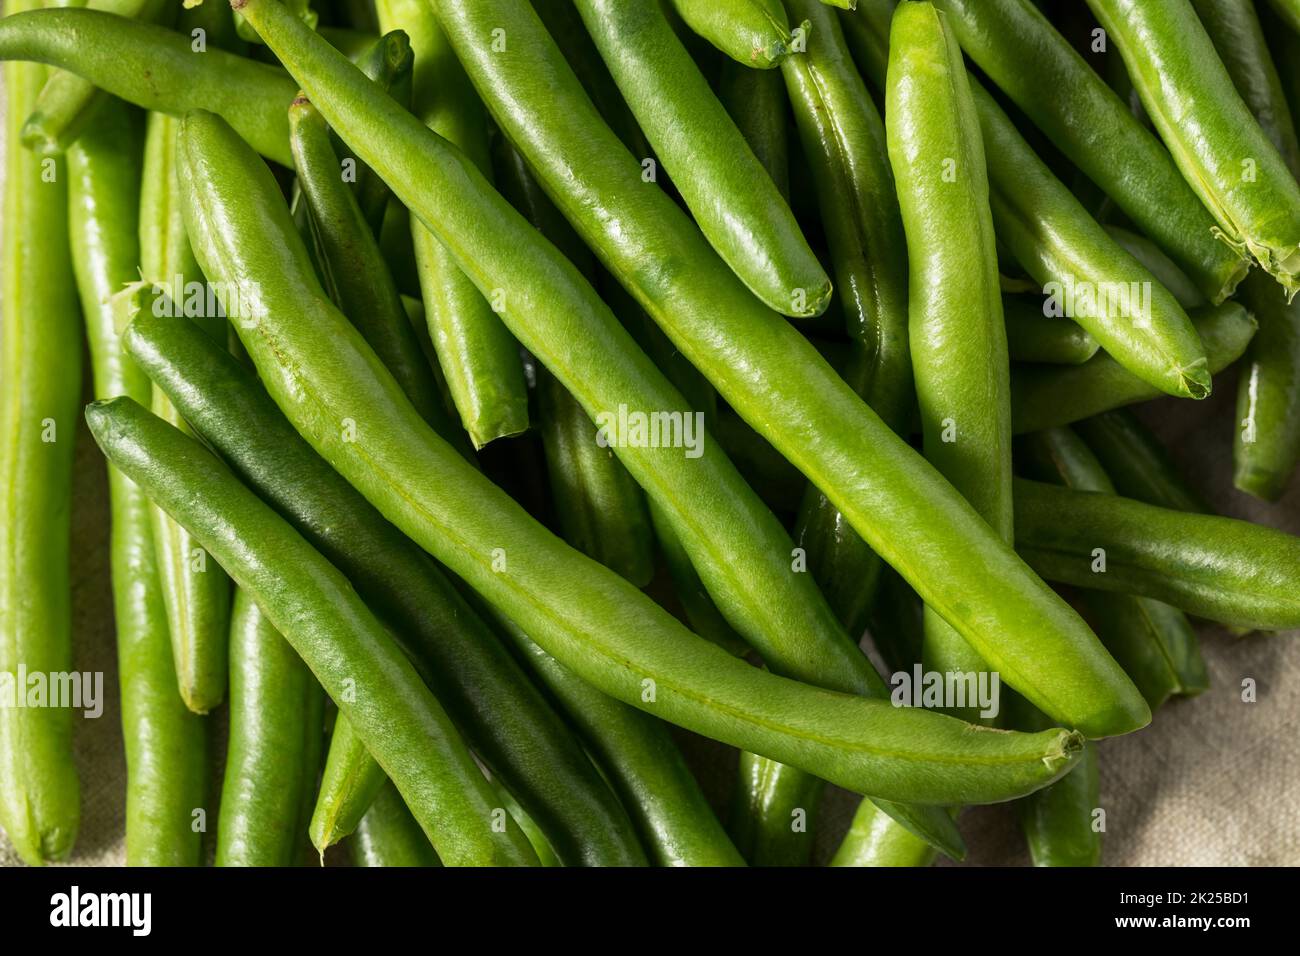 Raw Green Organic String Beans in a Bunch Stock Photo - Alamy